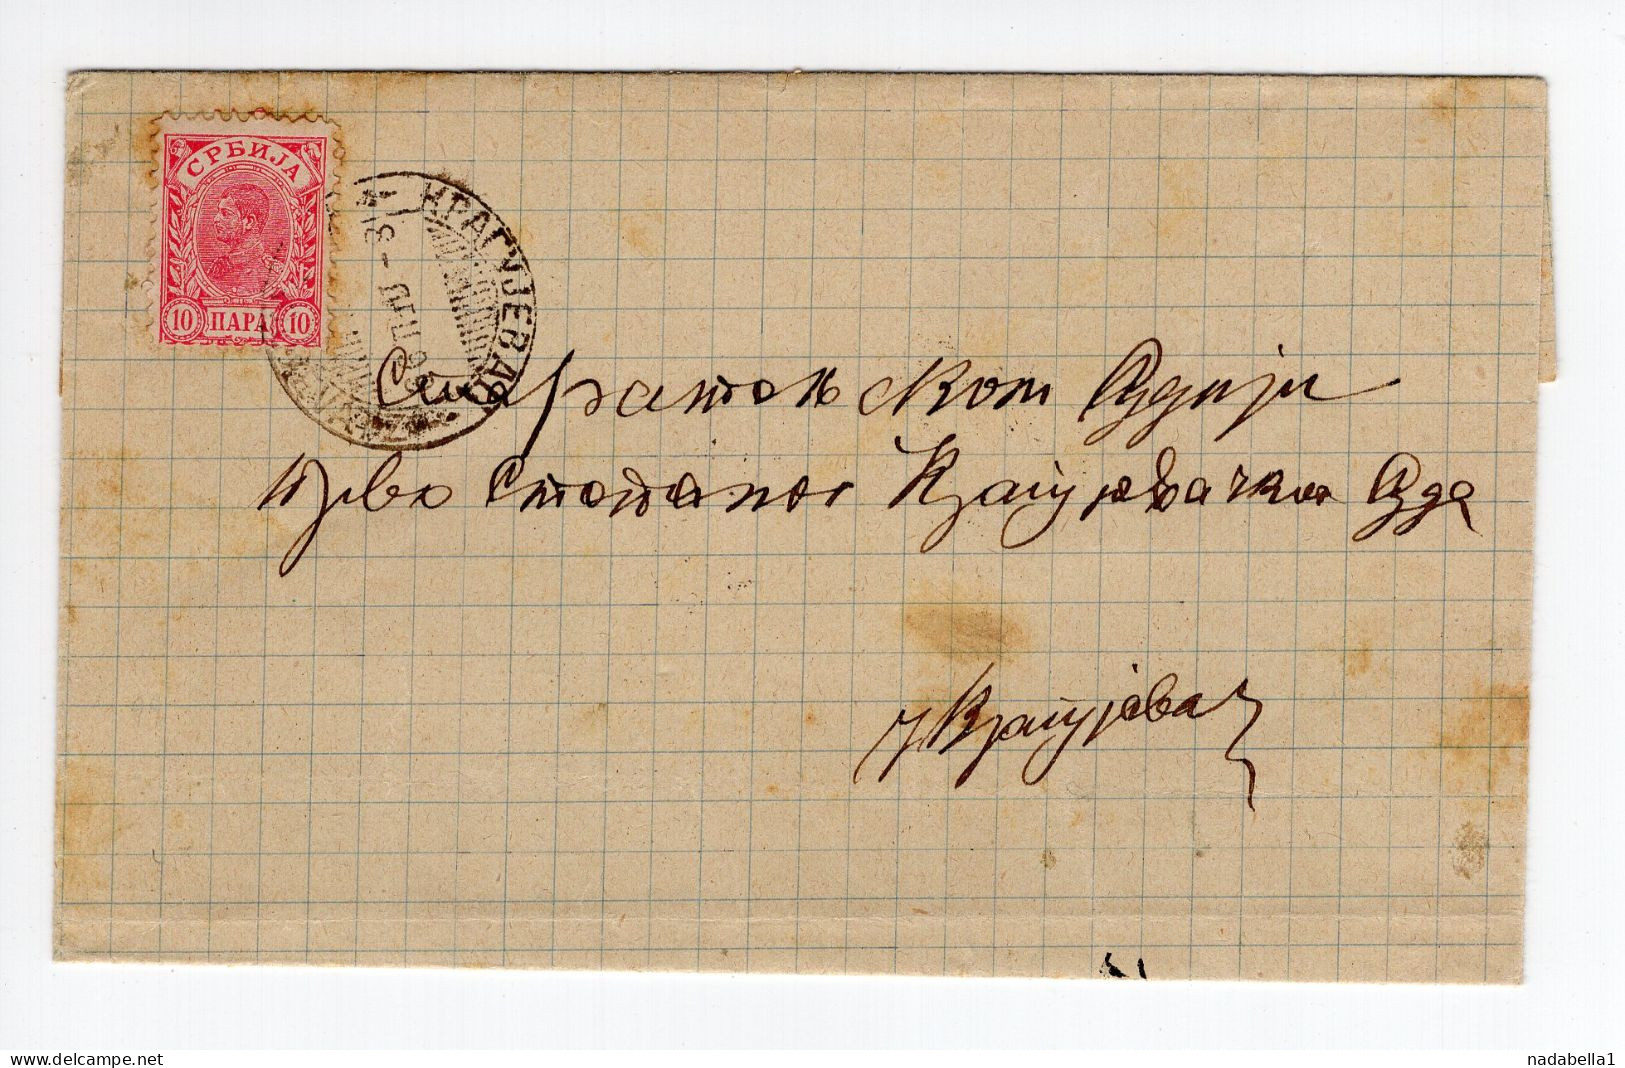 1899. SERBIA,KRAGUJEVAC,LOCAL RATE 10 PARA FOR DOUBLE WEIGHT WE BELIEVE,COVER,INSIDE LETTER MISSING - Serbie